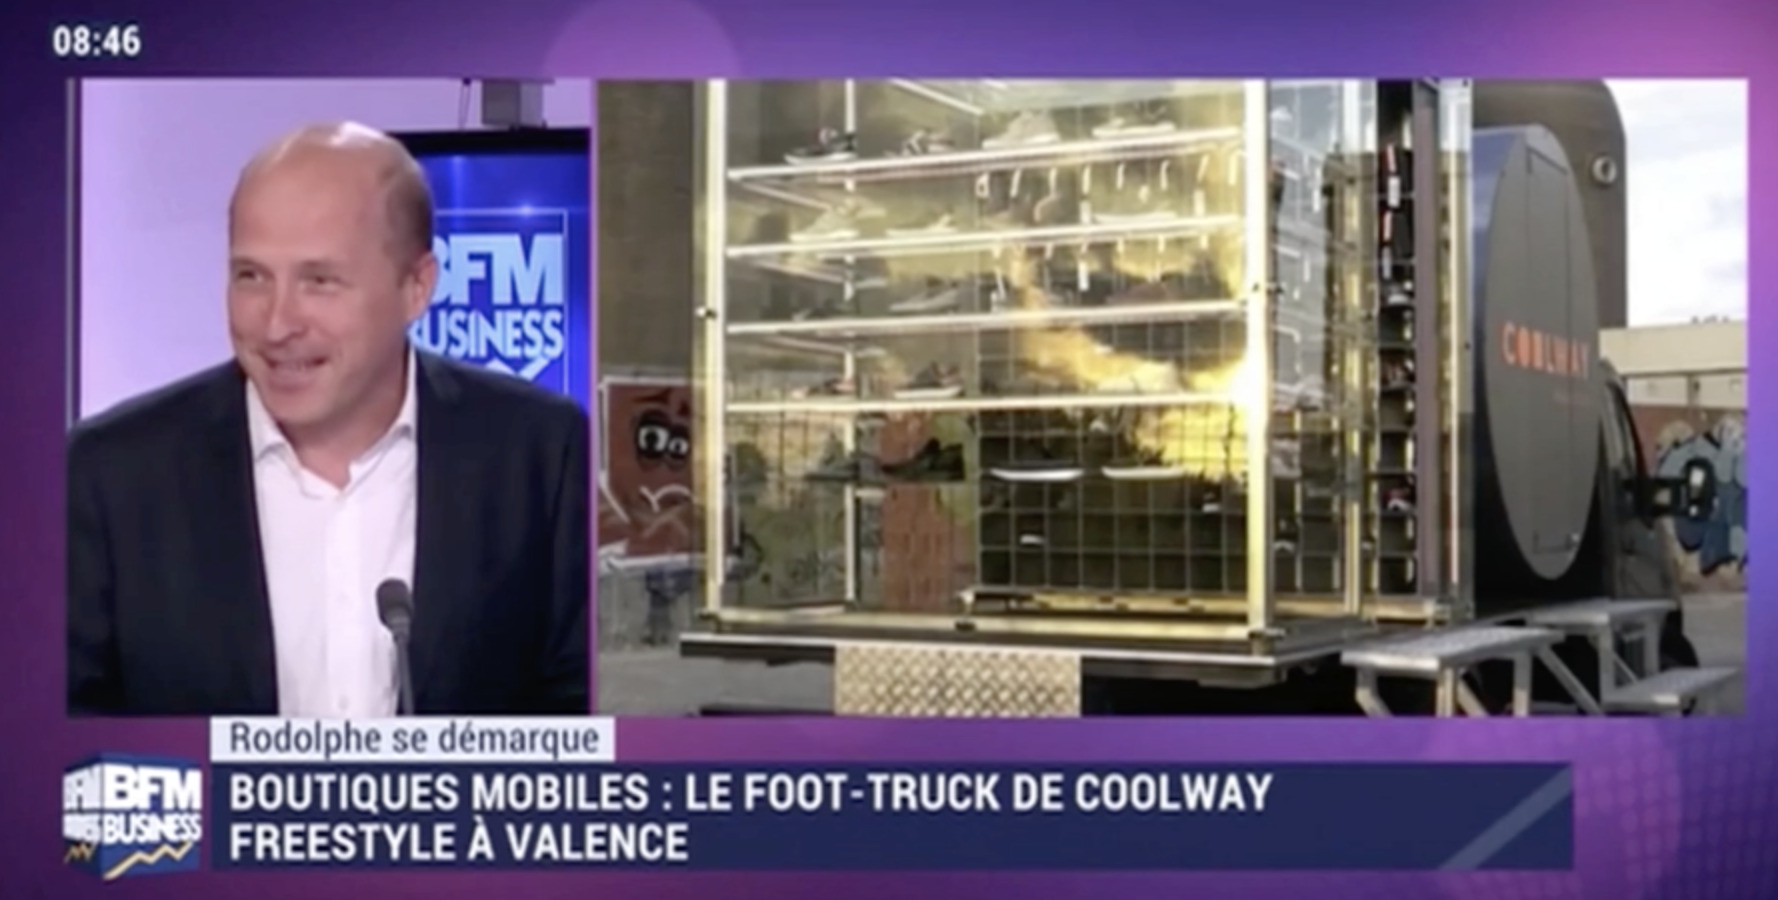 COOLWAY / INNOVER POUR LE COMMERCE